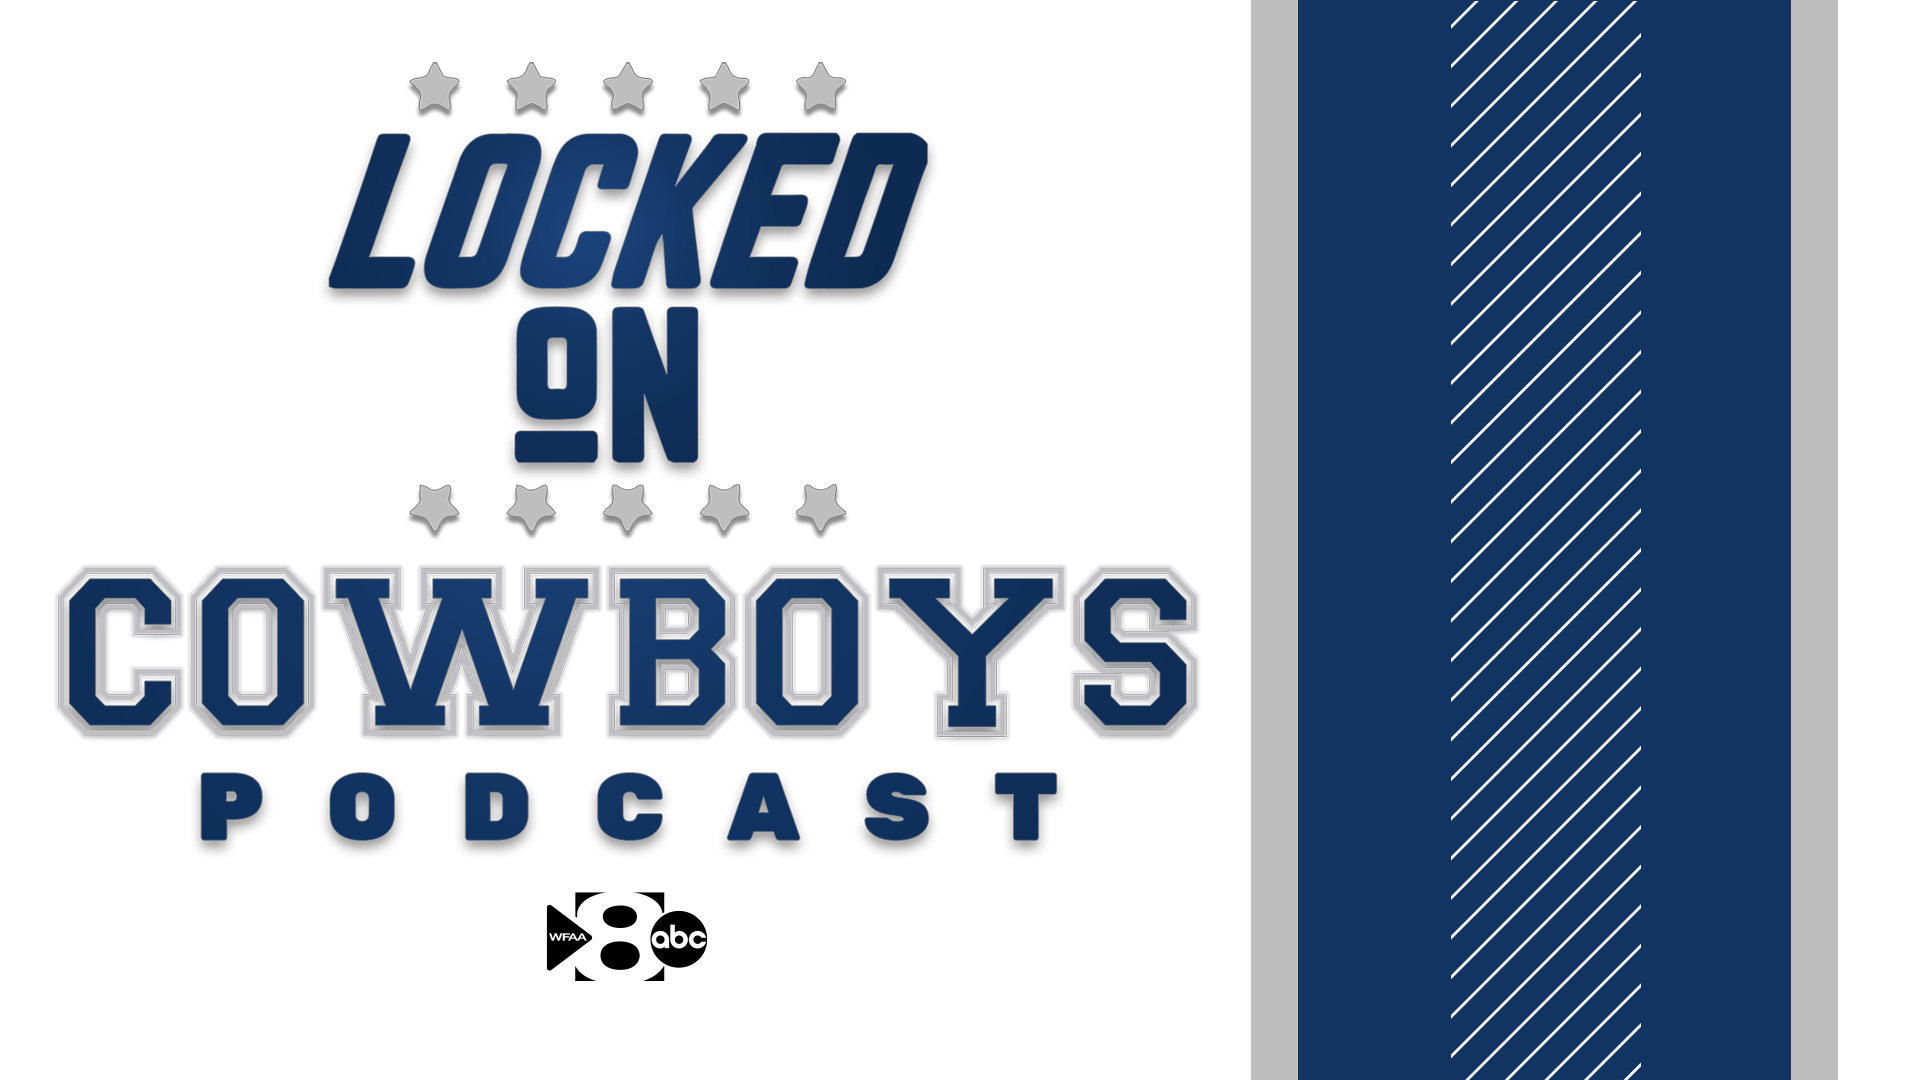 The Cowboys picked up their first win of the season in LA. @Marcus_Mosher and @McCoolBCB talk about Micah Parsons' effort and the emergence of Tony Pollard.